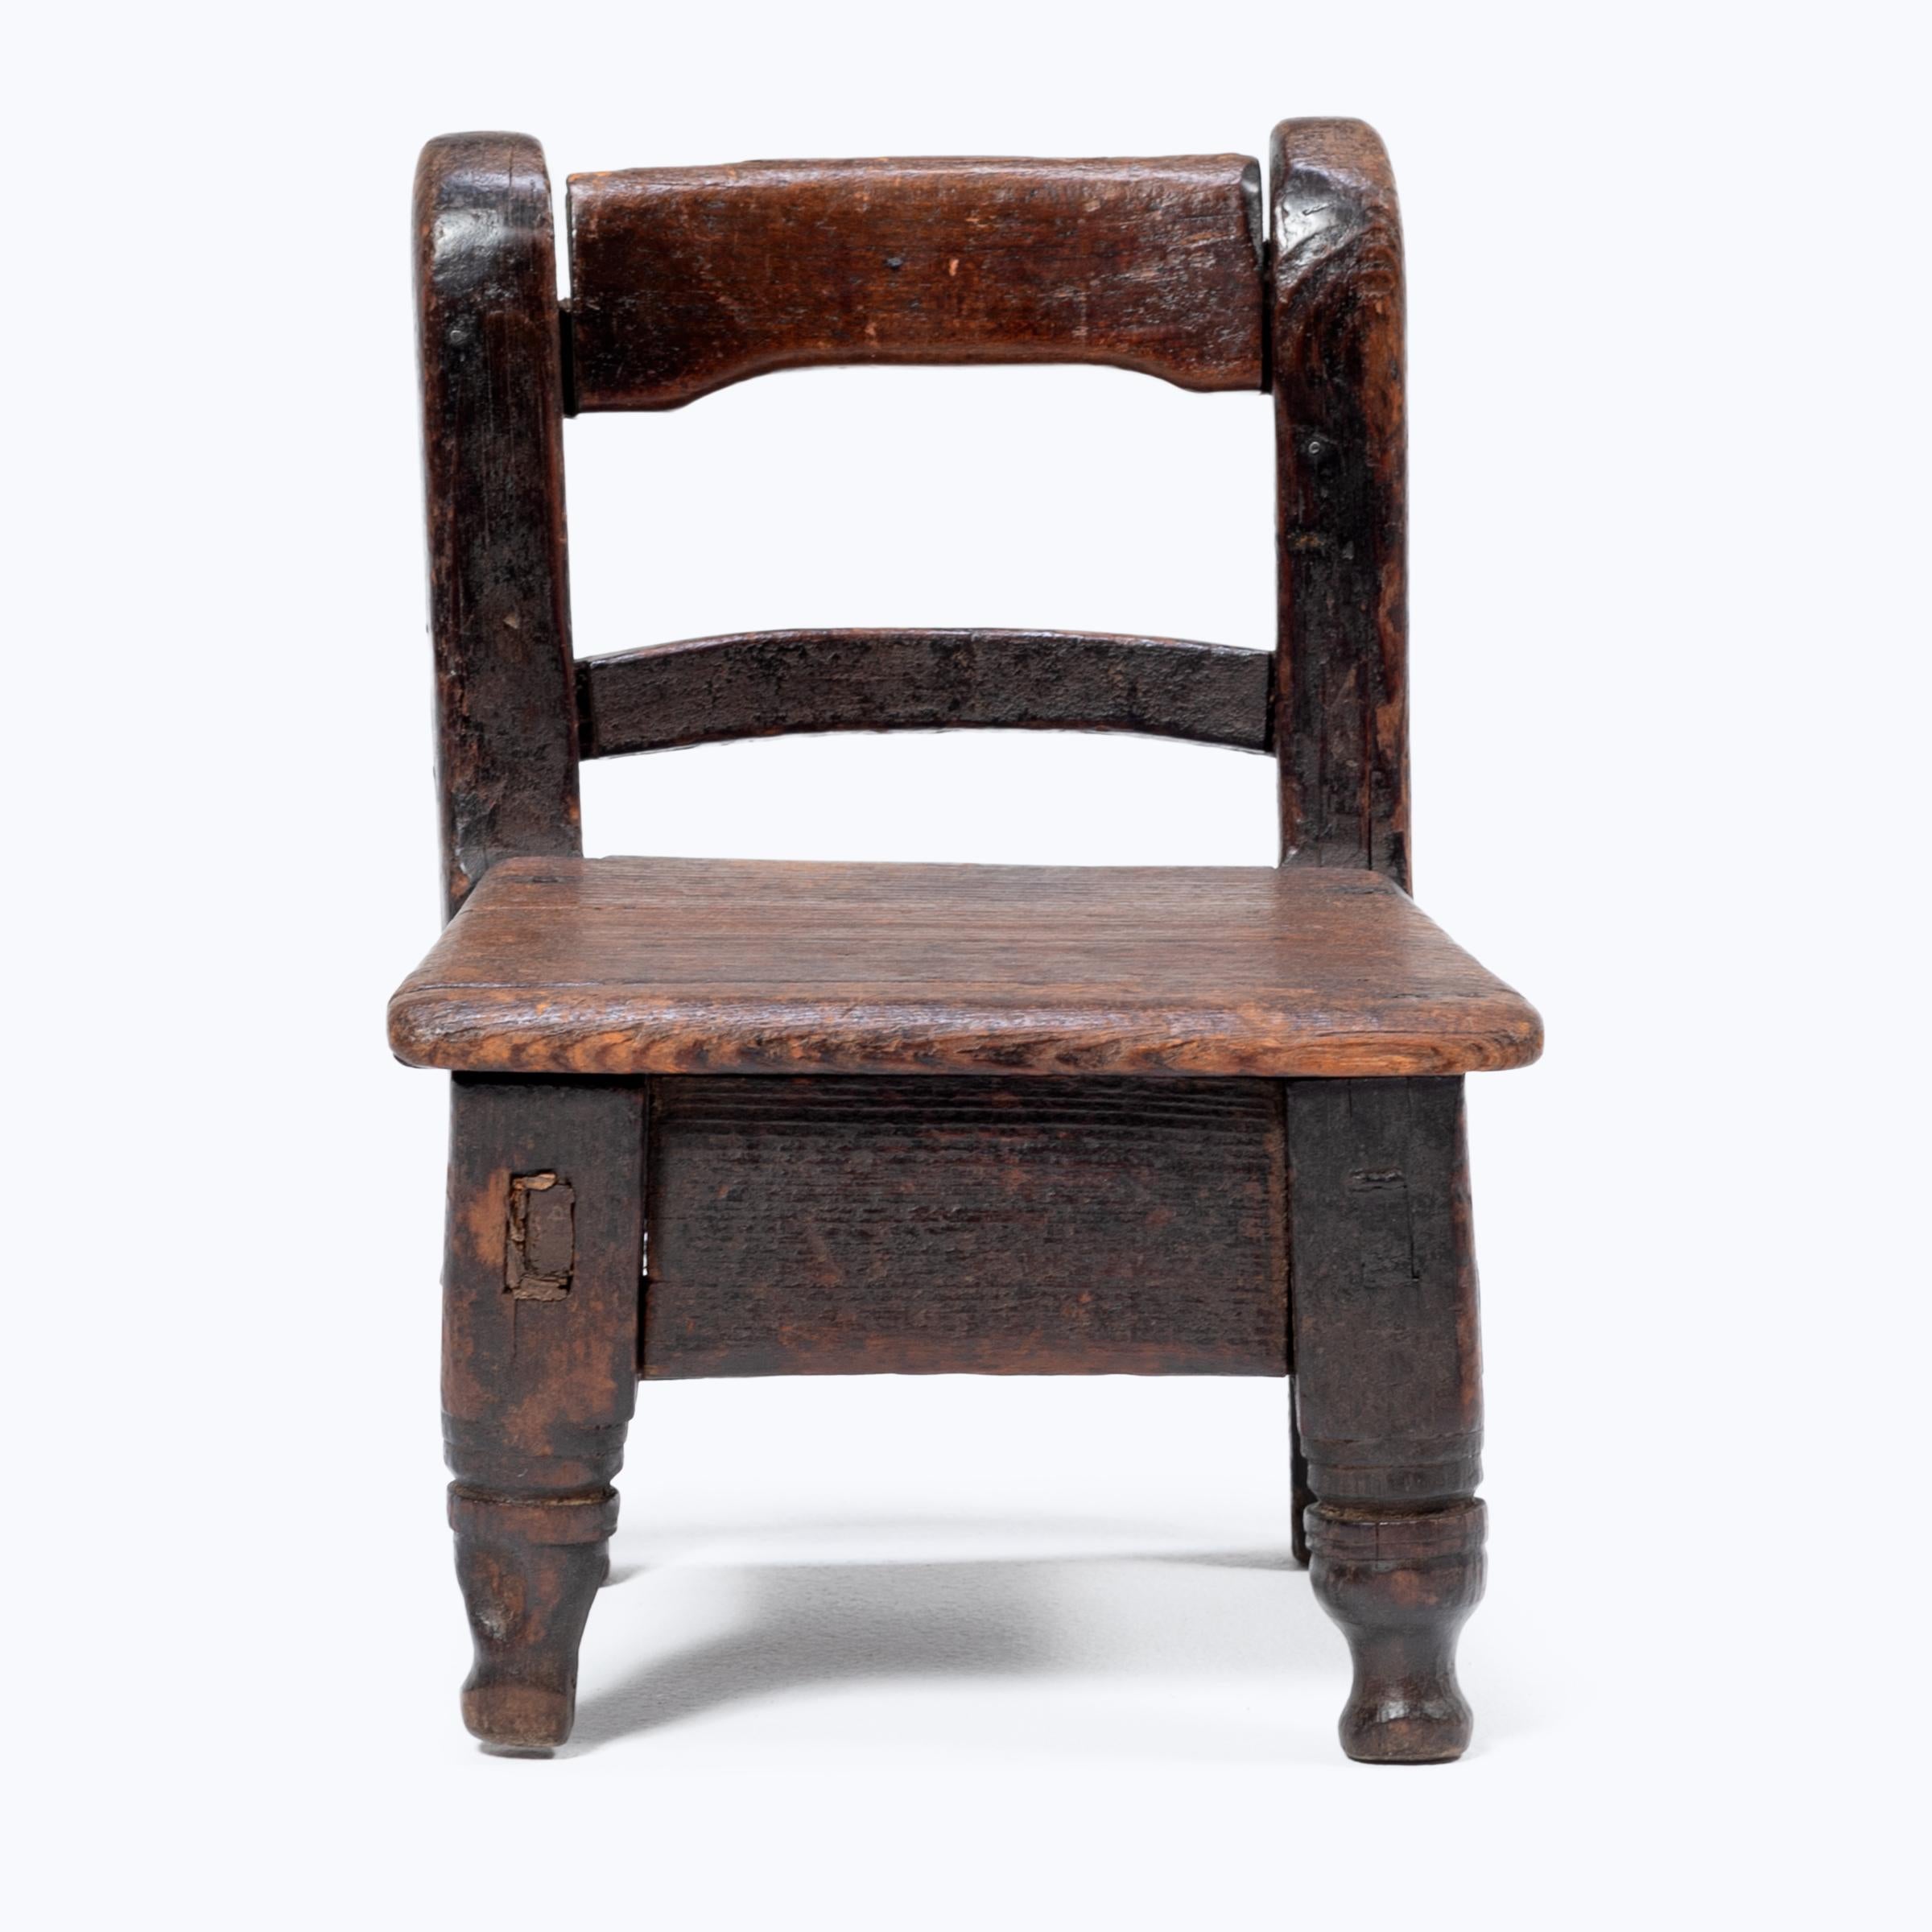 Crafted in the early 20th century, this petite Guatemalan children's chair charms with its playful asymmetry and richly textured surface. Influenced by Spanish Colonial furniture design, the chair has a slatted back and square seat resting on two